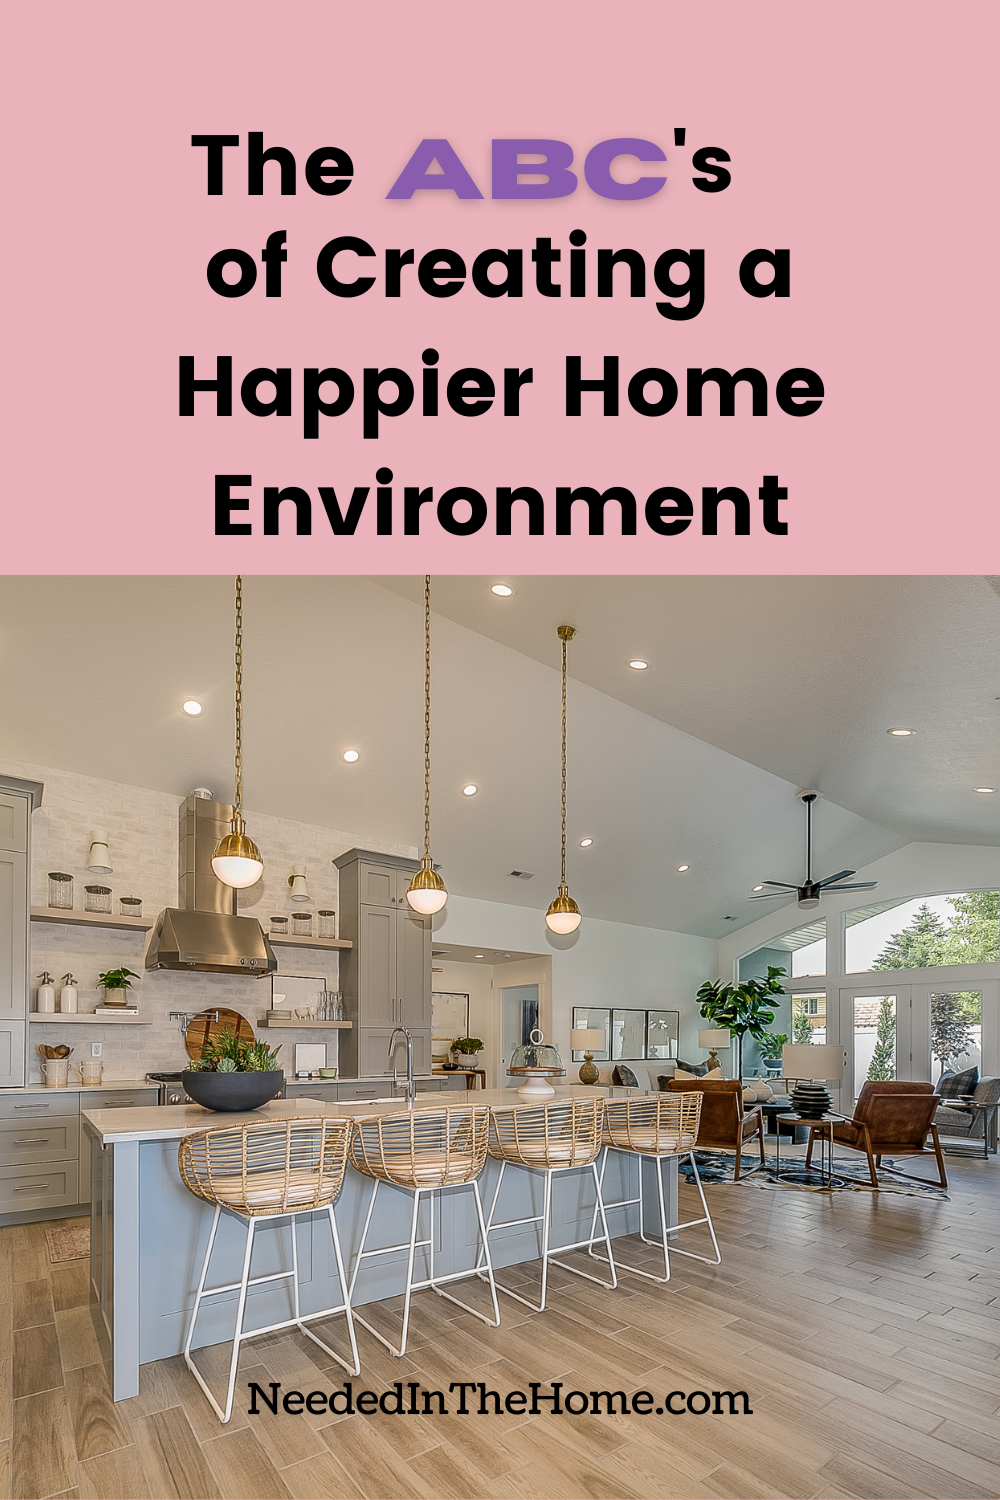 pinterest-pin-description The ABC's of Creating a Happier Home Environment open concept kitchen dining room neededinthehome